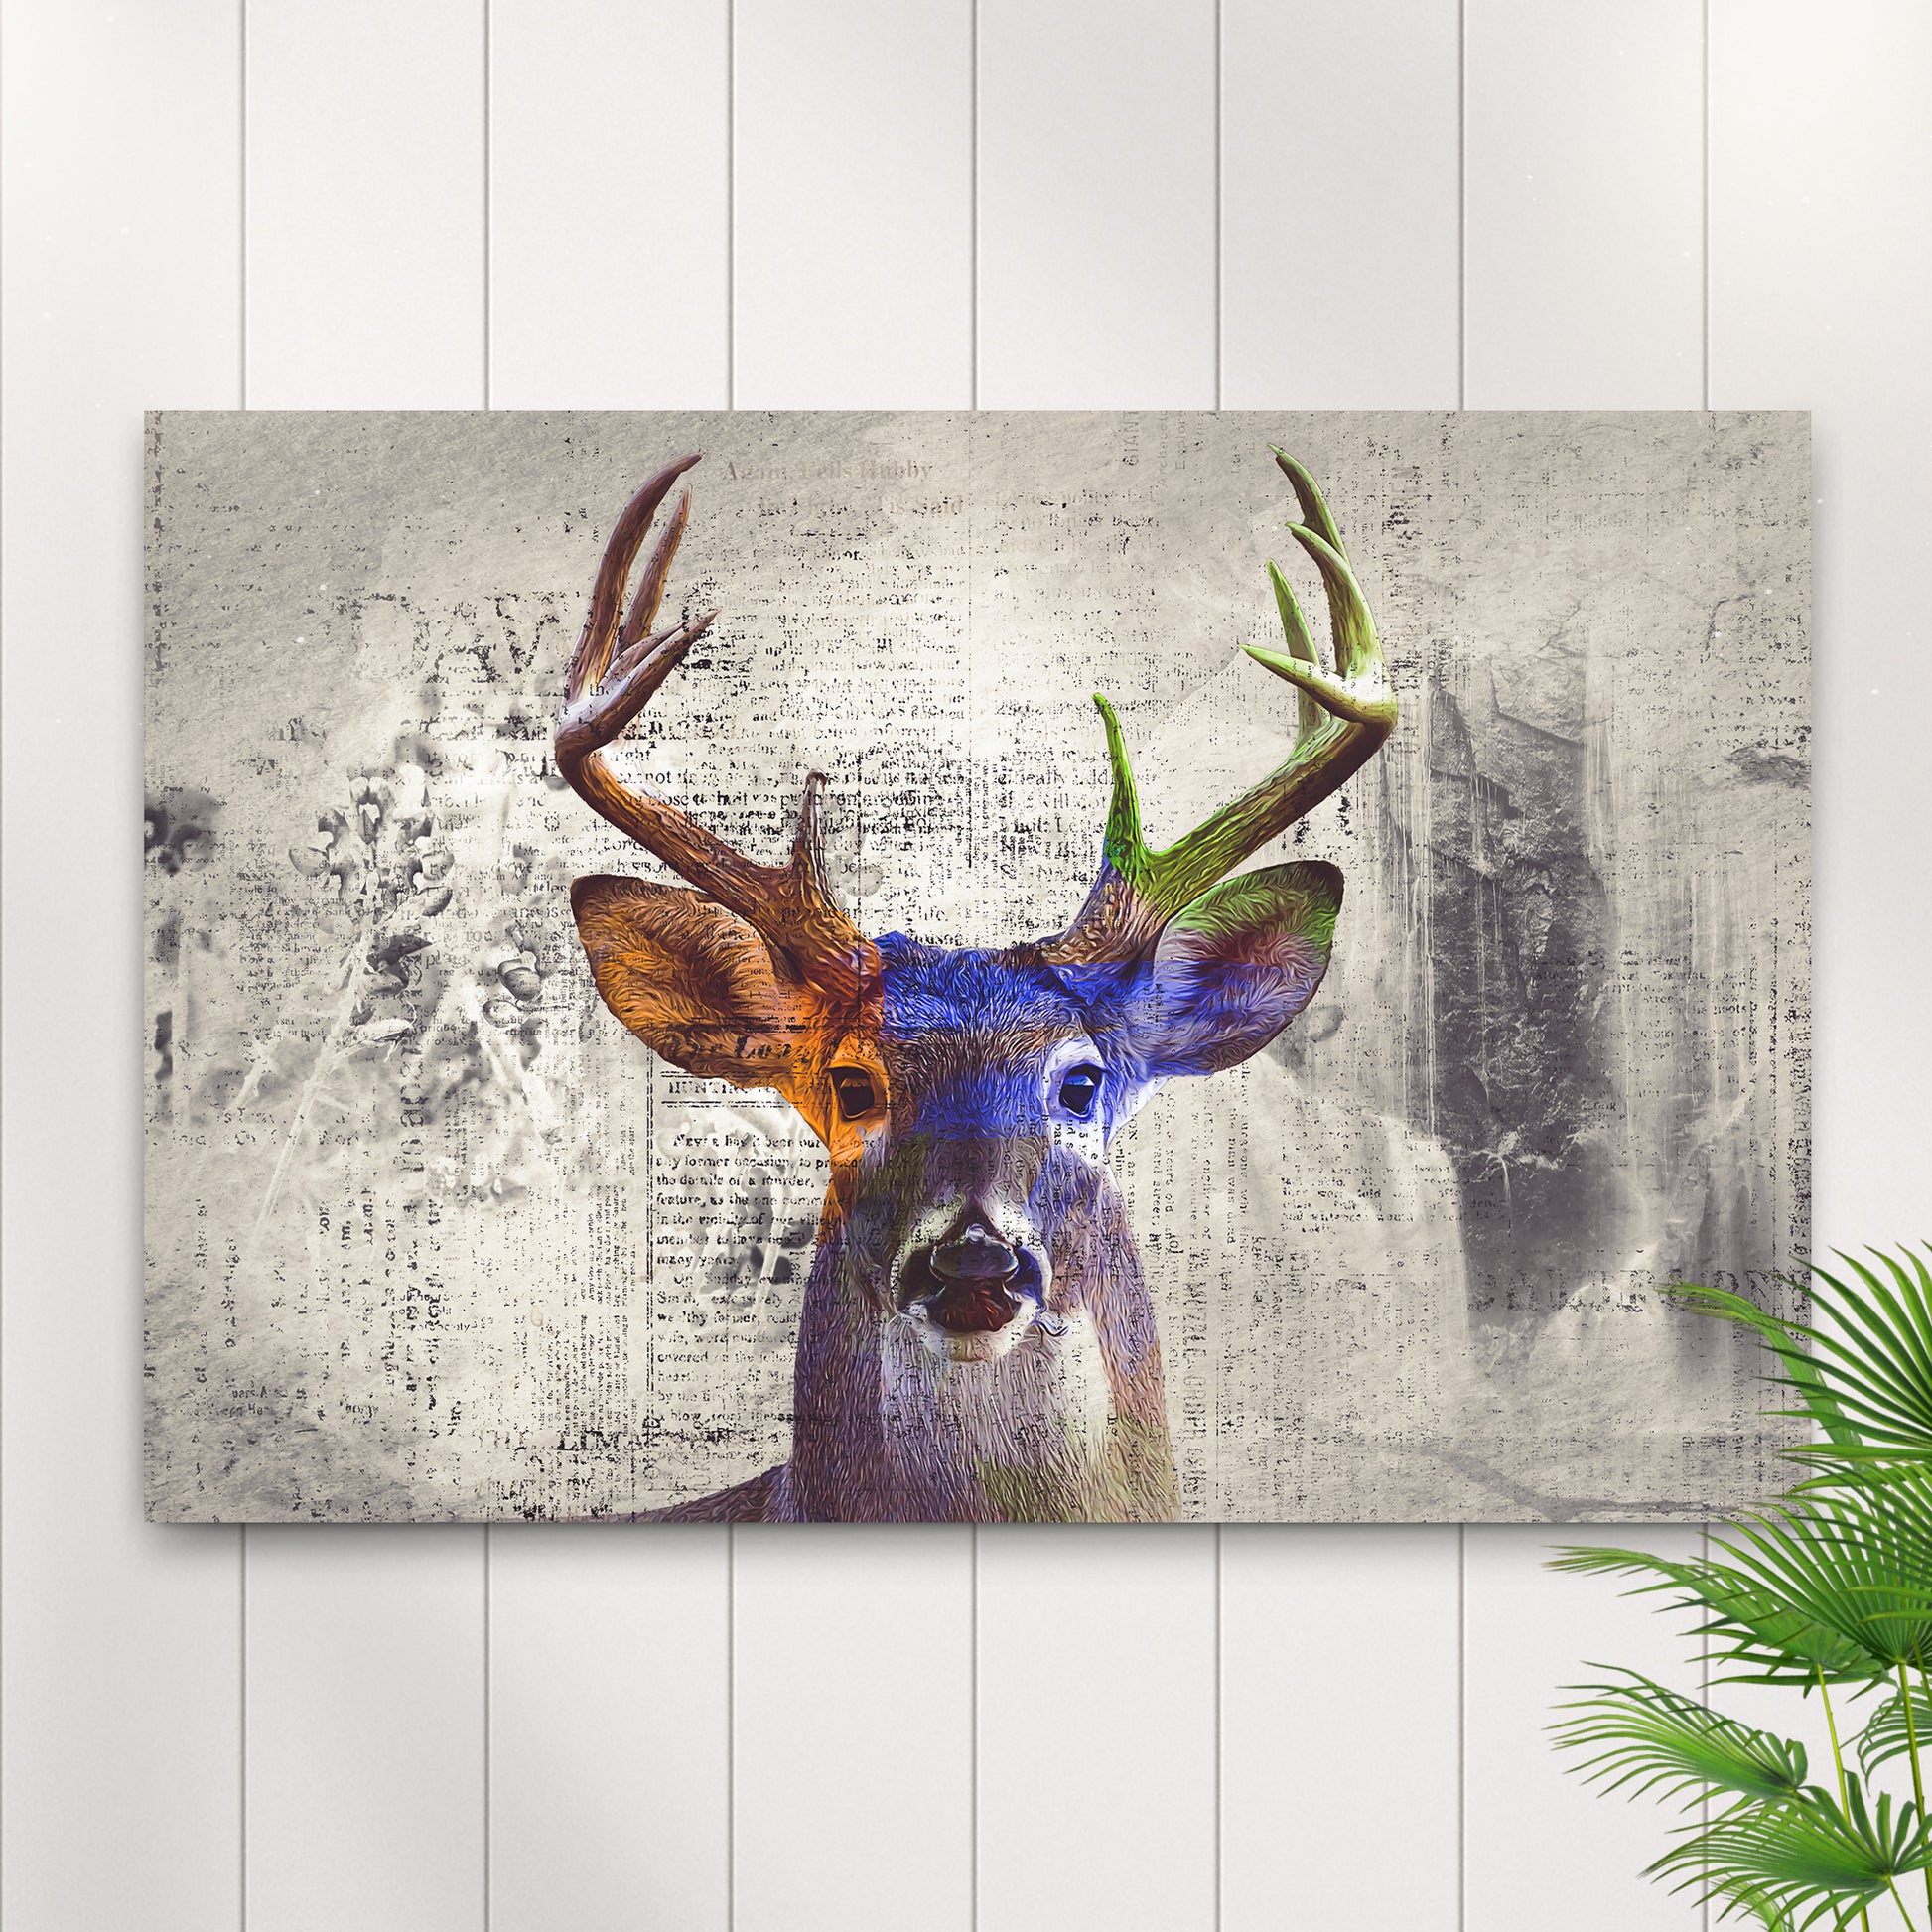 Stunning Deer Canvas Wall Art - Image by Tailored Canvases